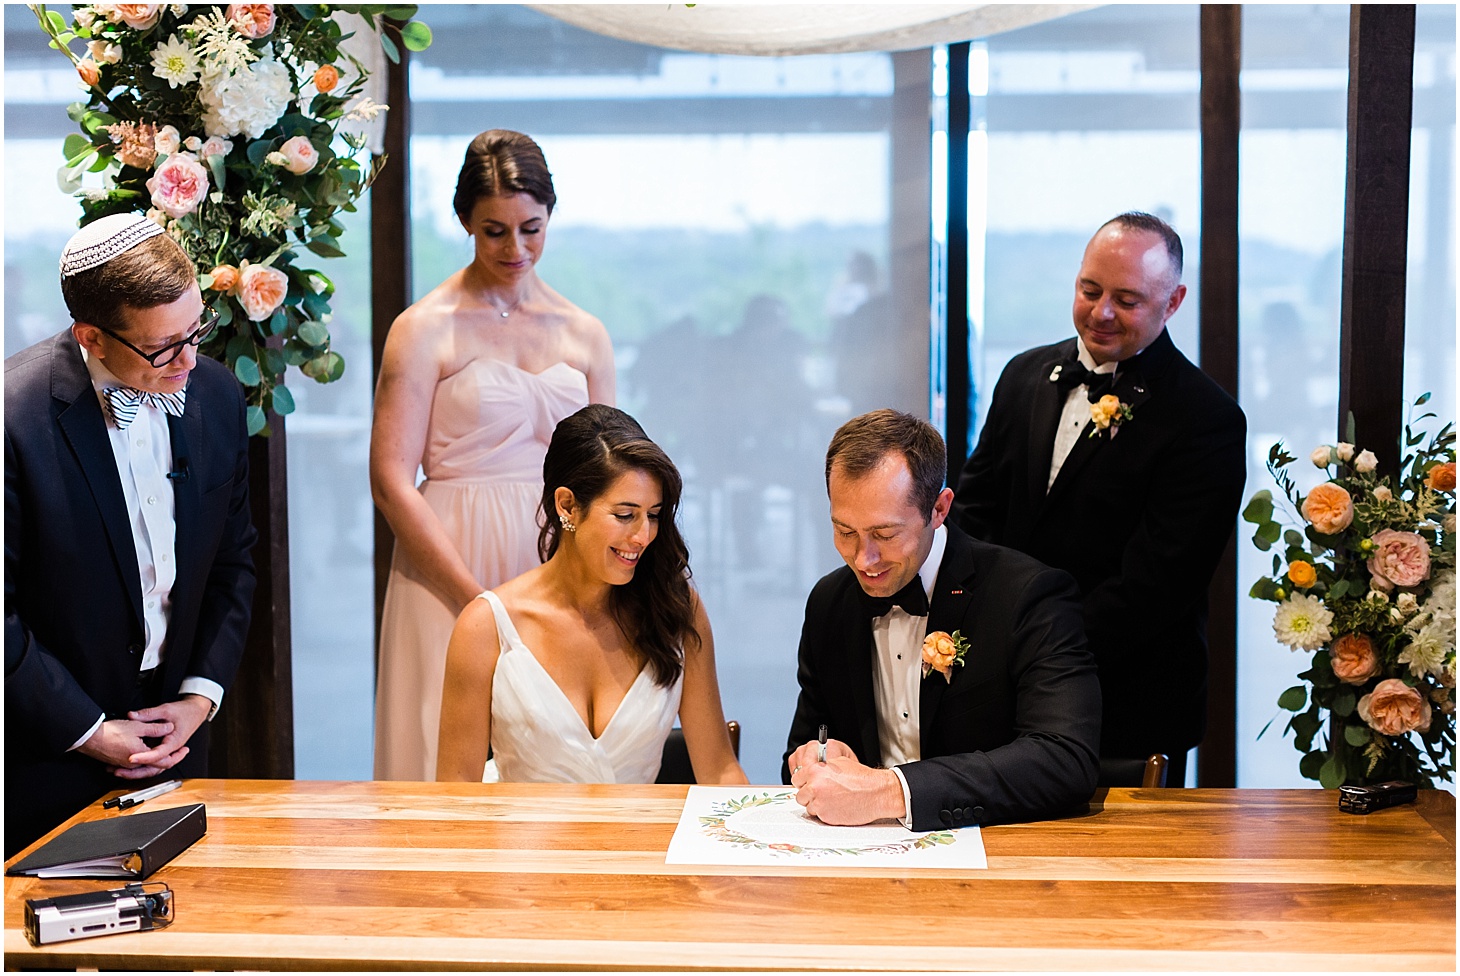 Signing the Ketubah at District Winery | Chic and Modern Interfaith Wedding in Washington, DC | Sarah Bradshaw Photography